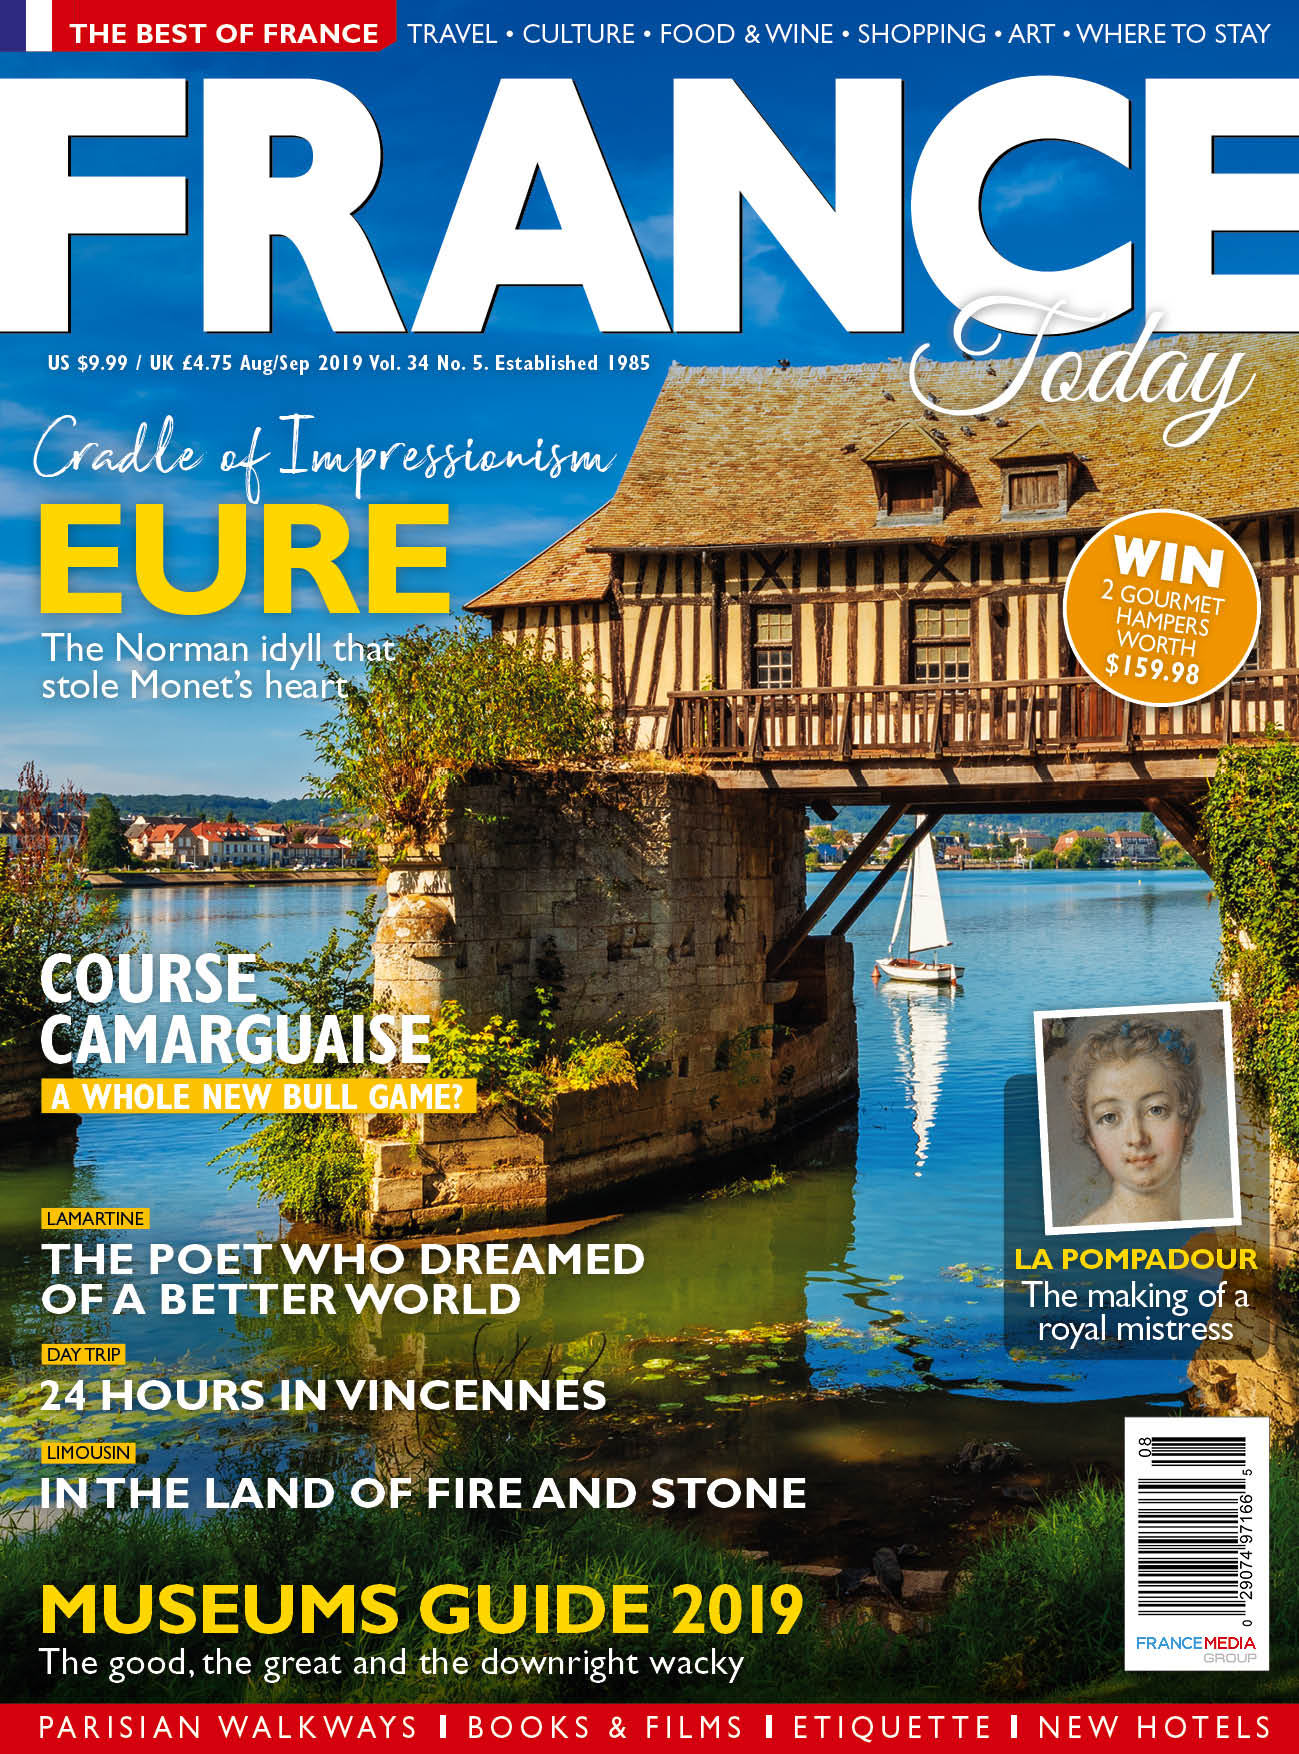 Issue 175 (Aug/Sep 2019)